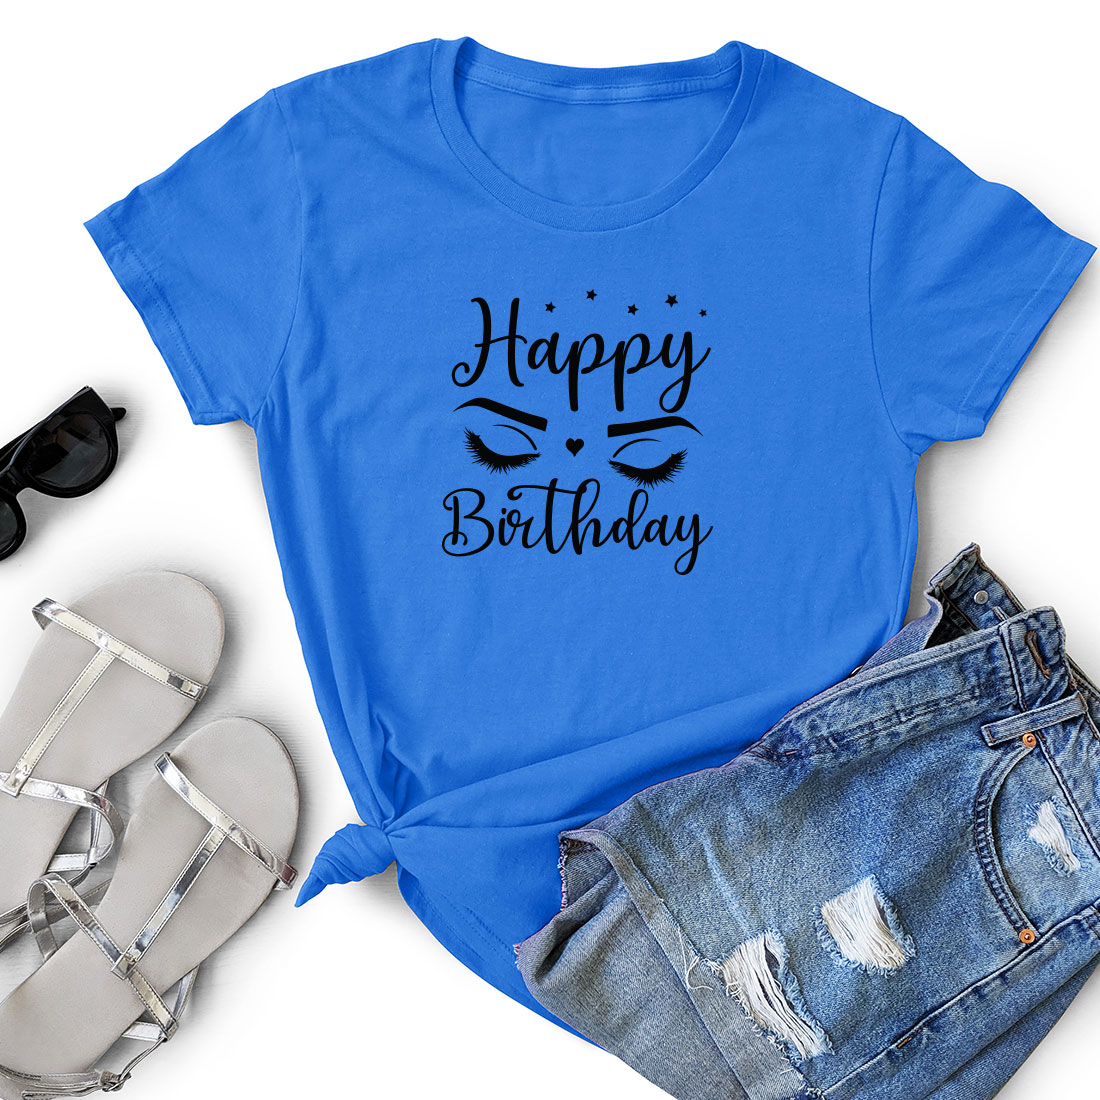 T - shirt that says happy birthday next to a pair of shorts.